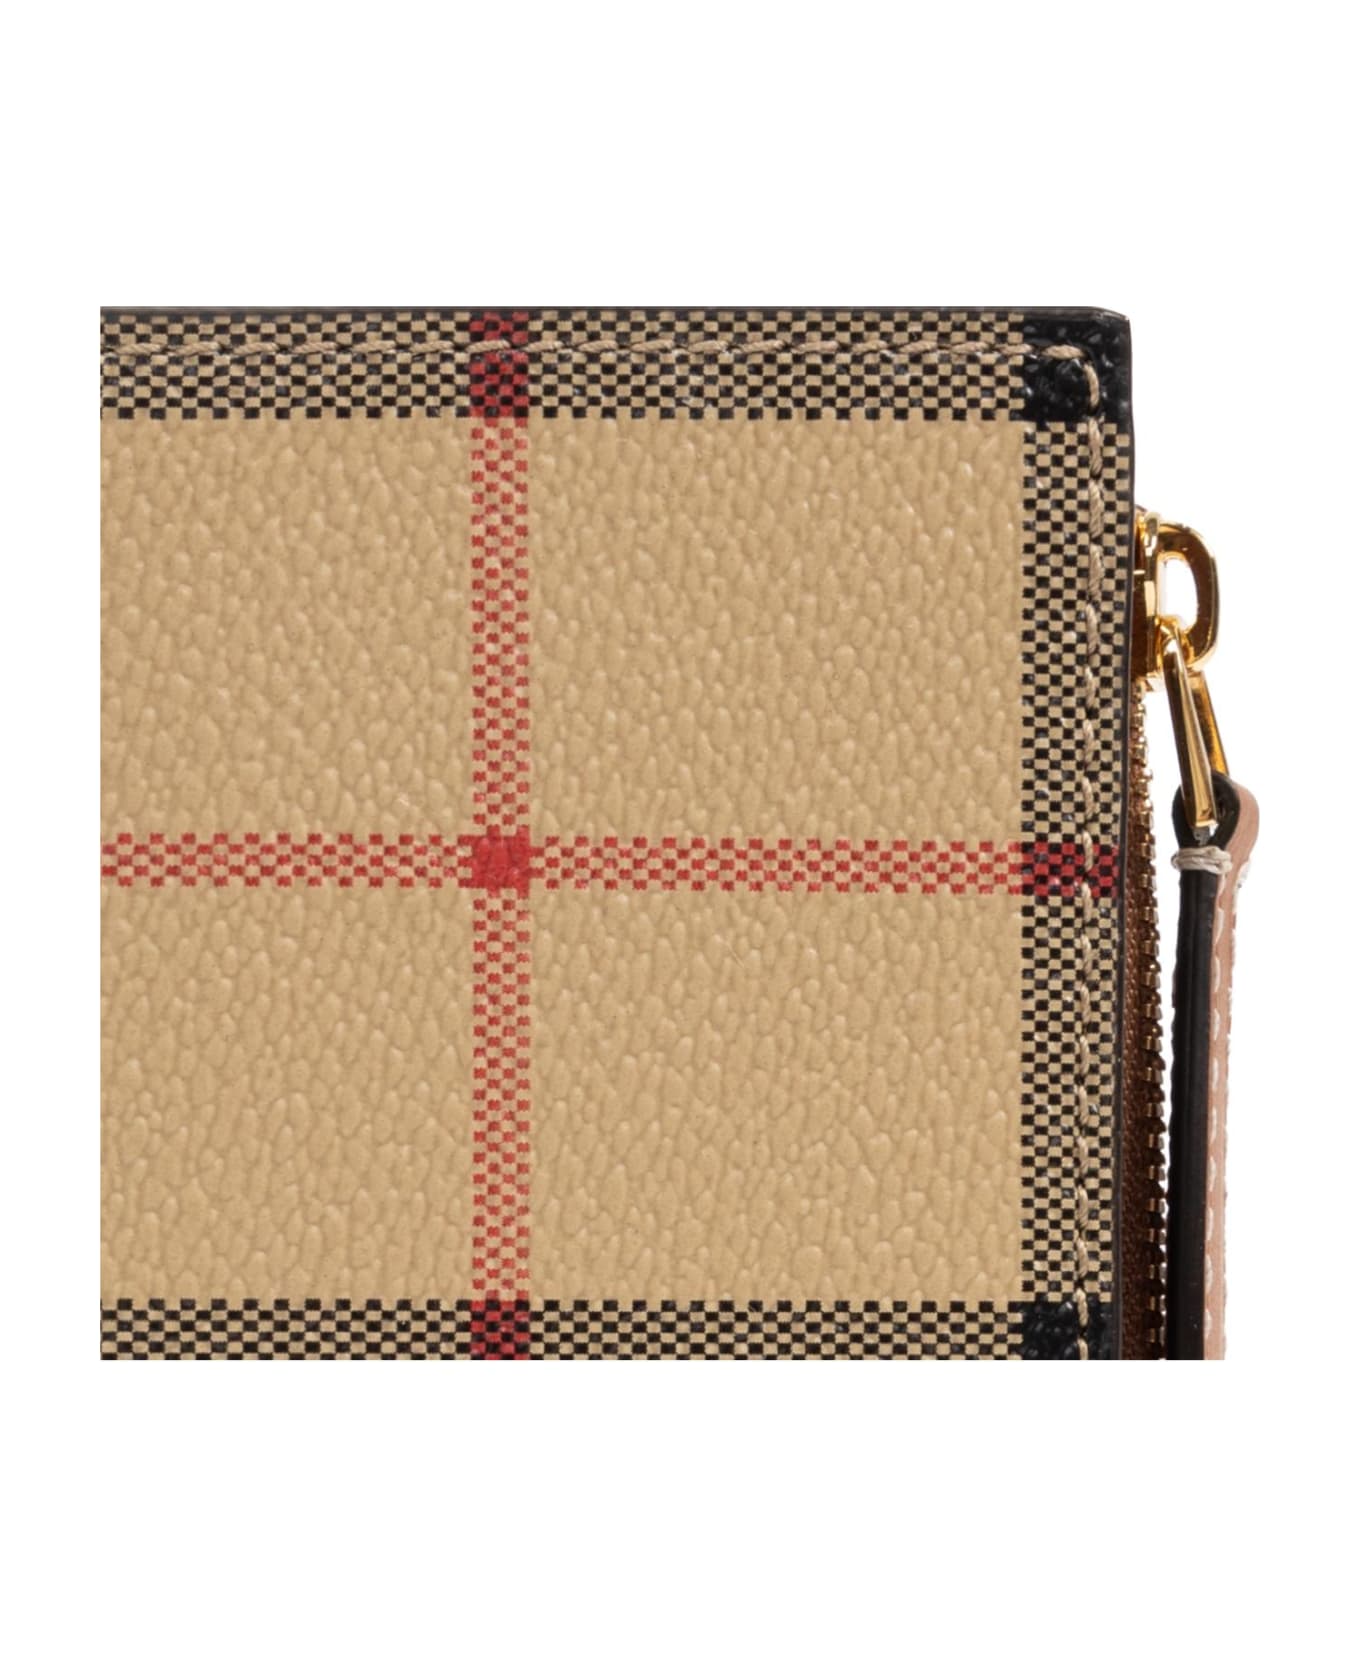 Burberry Checked Wallet - Archive Beige 財布